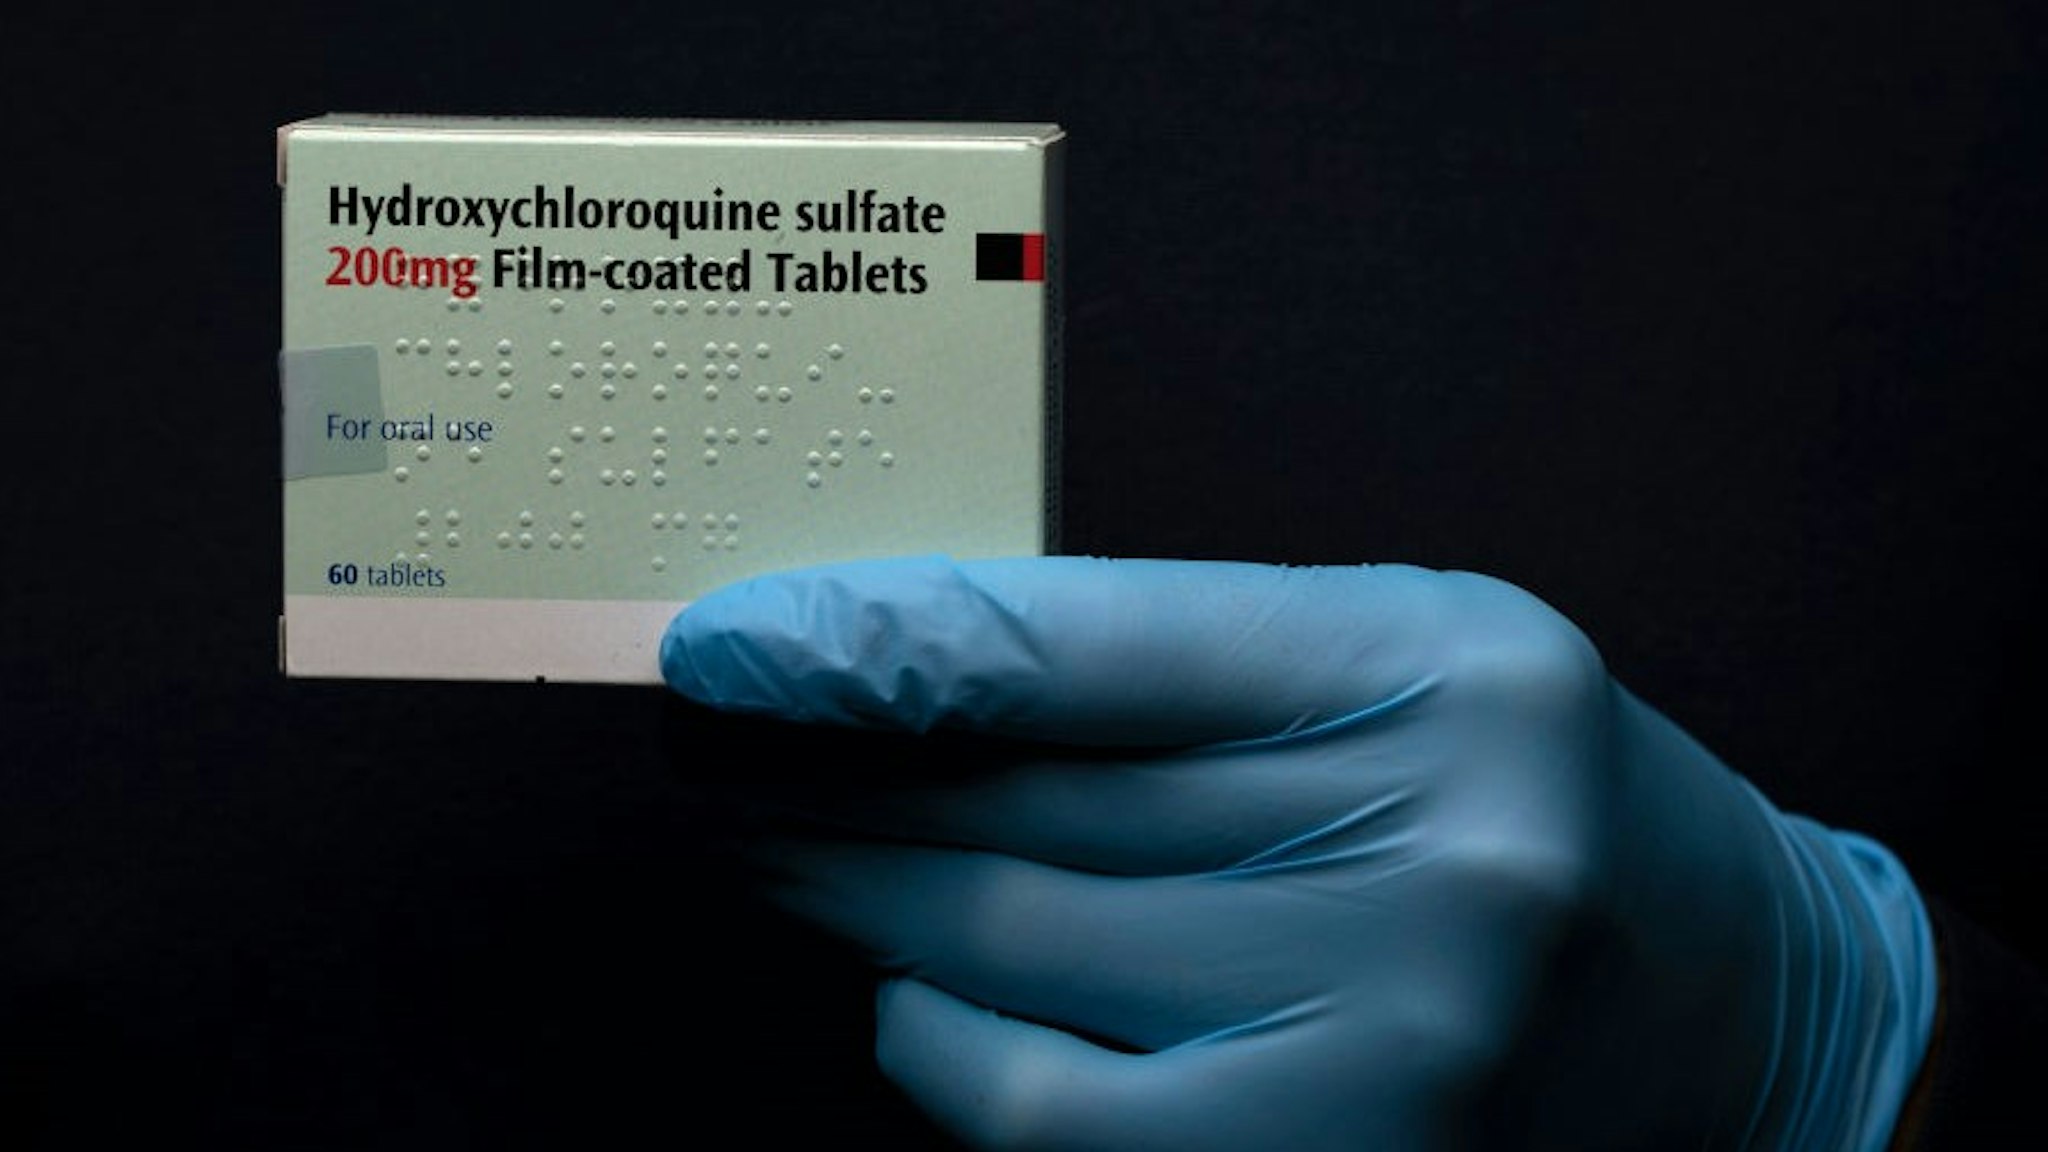 In this photo illustration a pack of Hydroxychloroquine Sulfate medication is held up on March 26, 2020 in London, United Kingdom. The Coronavirus (COVID-19) pandemic has spread to many countries across the world, claiming over 20,000 lives and infecting hundreds of thousands more. U.S. President Donald Trump recently promoted Hydroxychloroquine, a common anti-malaria drug, as a potential treatment for COVID-19 when combined with the antibiotic azithromycin. “HYDROXYCHLOROQUINE &amp; AZITHROMYCIN, taken together, have a real chance to be one of the biggest game changers in the history of medicine,” President Trump tweeted last week. (Photo by